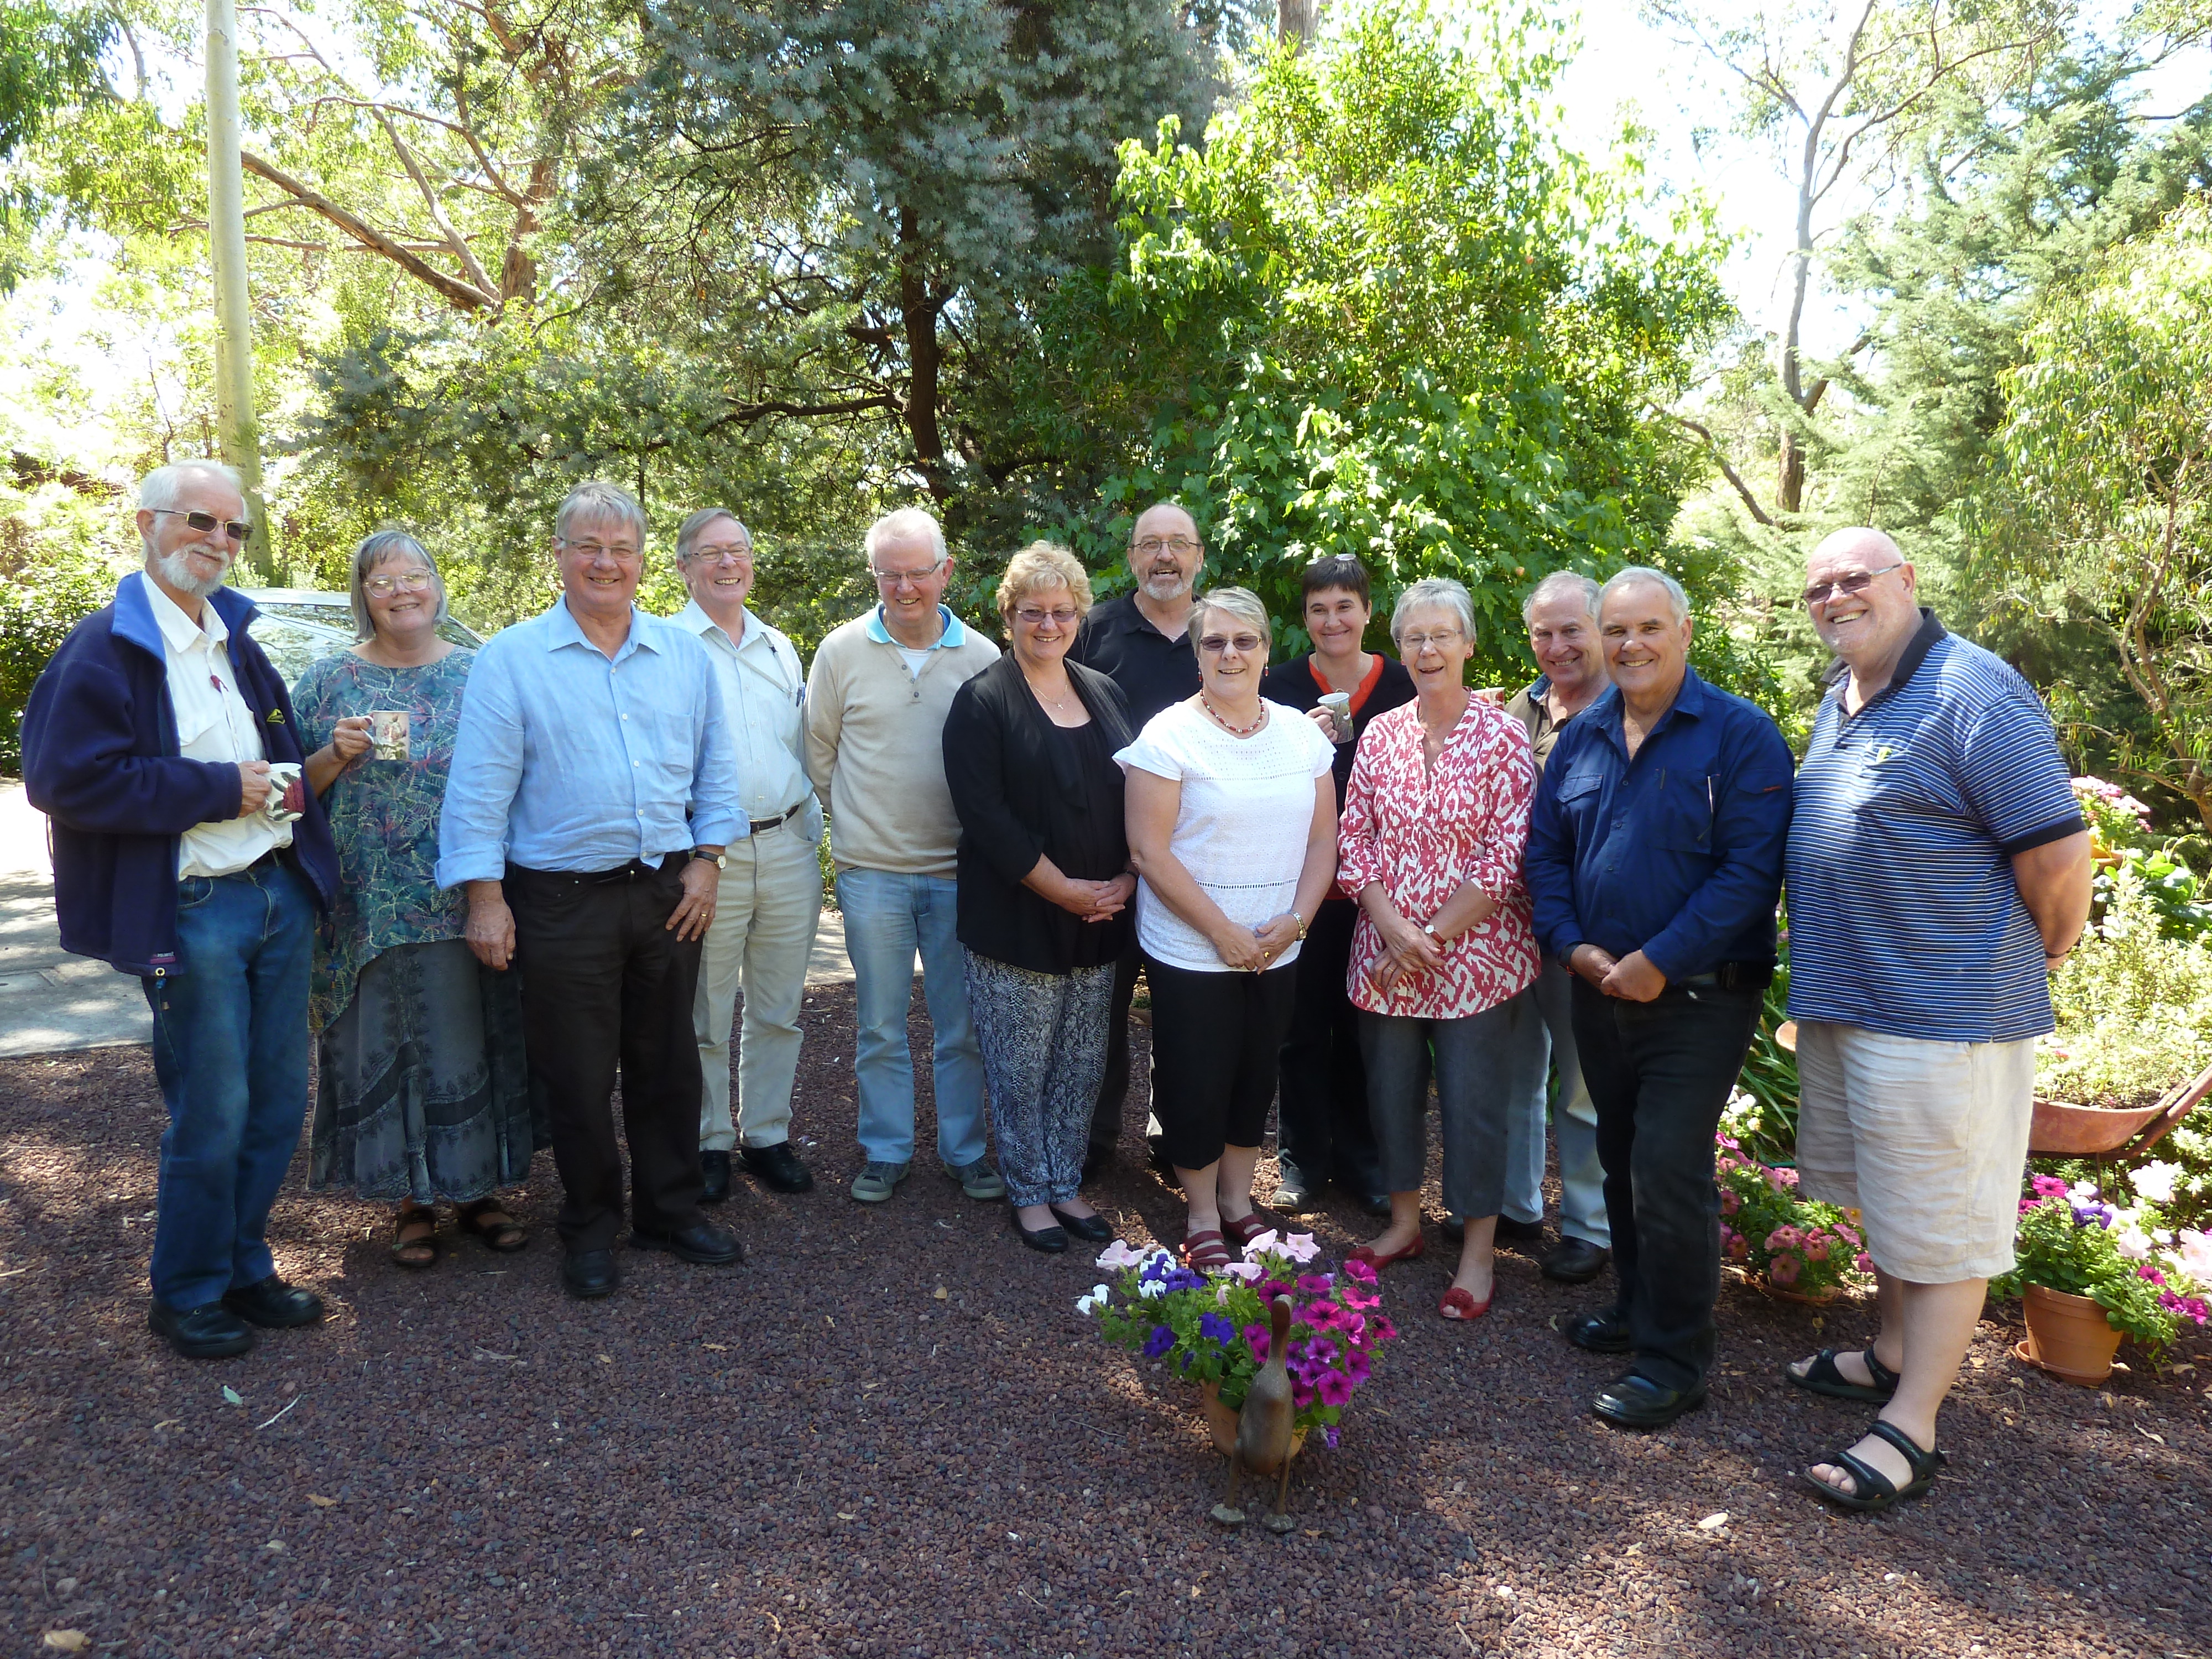 Supervisors at an education-in-supervision workshop, held at John and Margie Virgin's home in the Adelaide hills. February, 2014